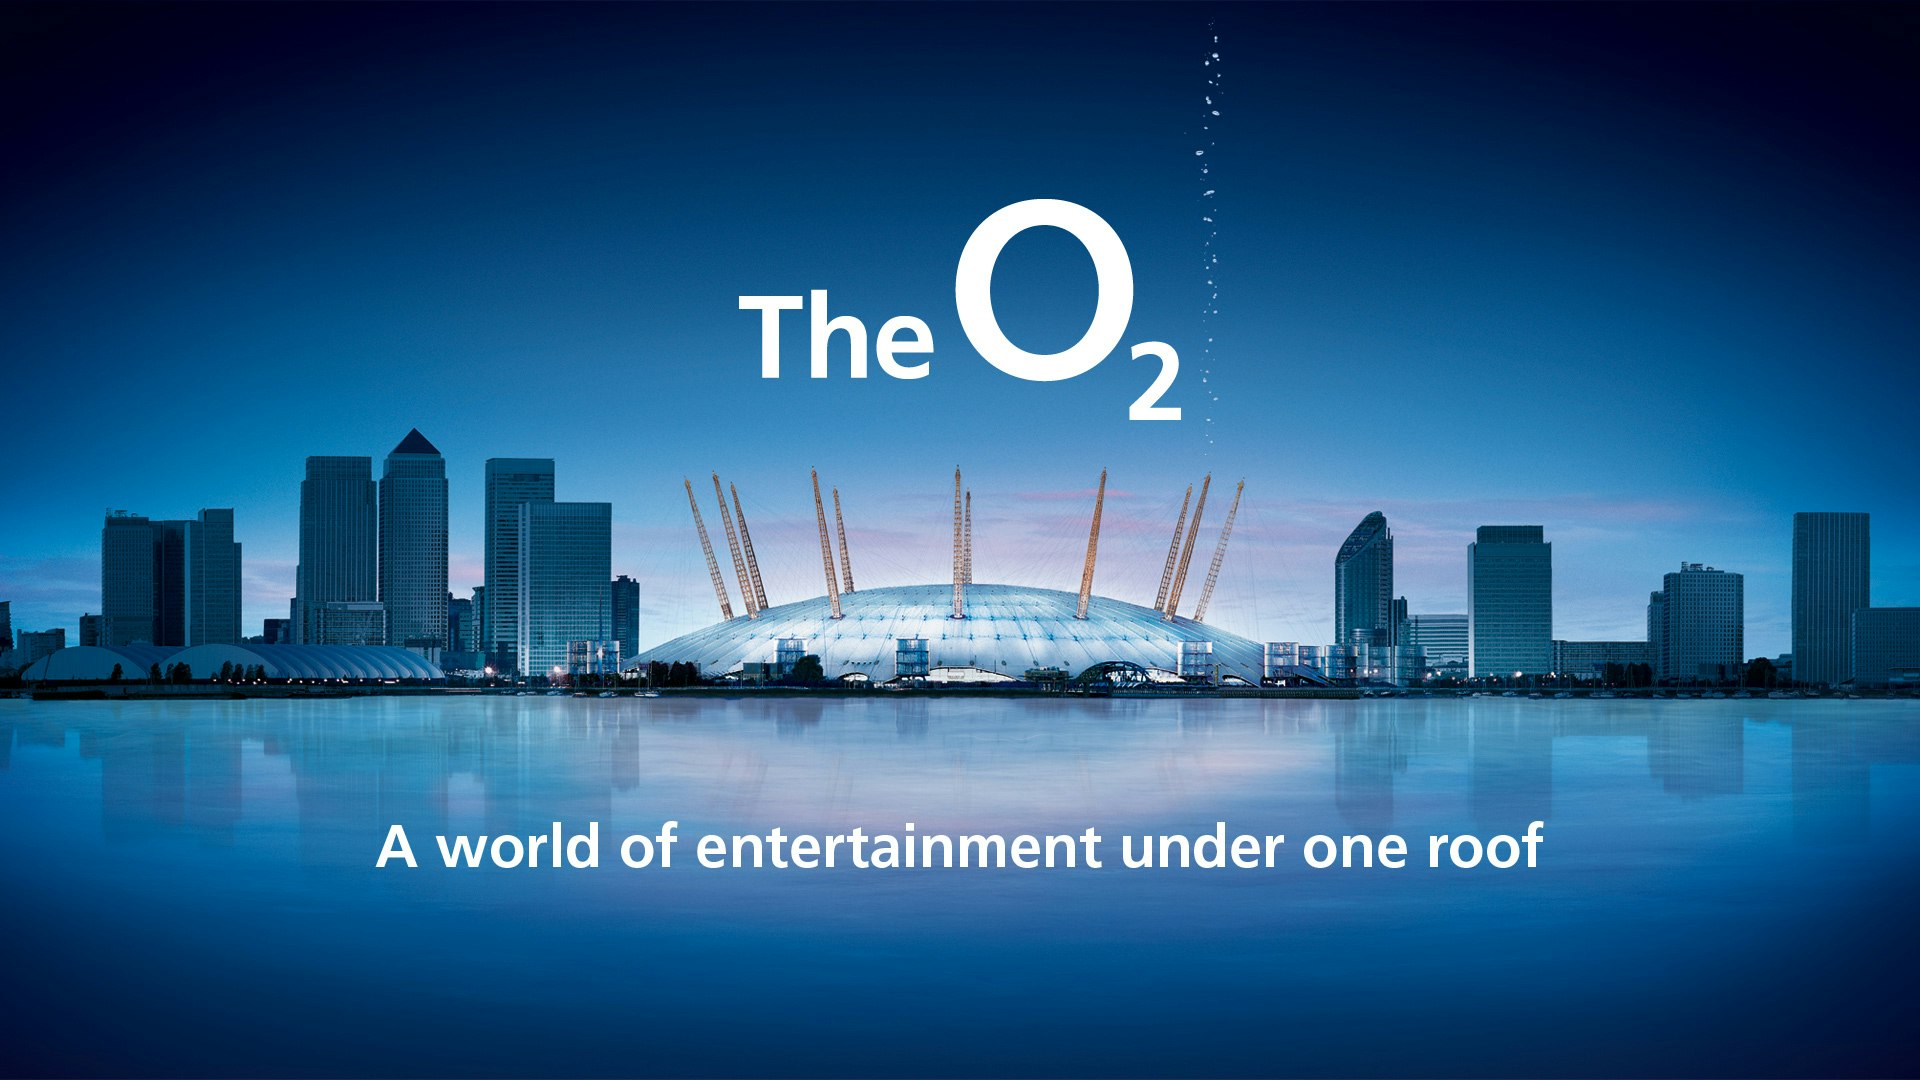 Jason Ford - The O2 Advertising